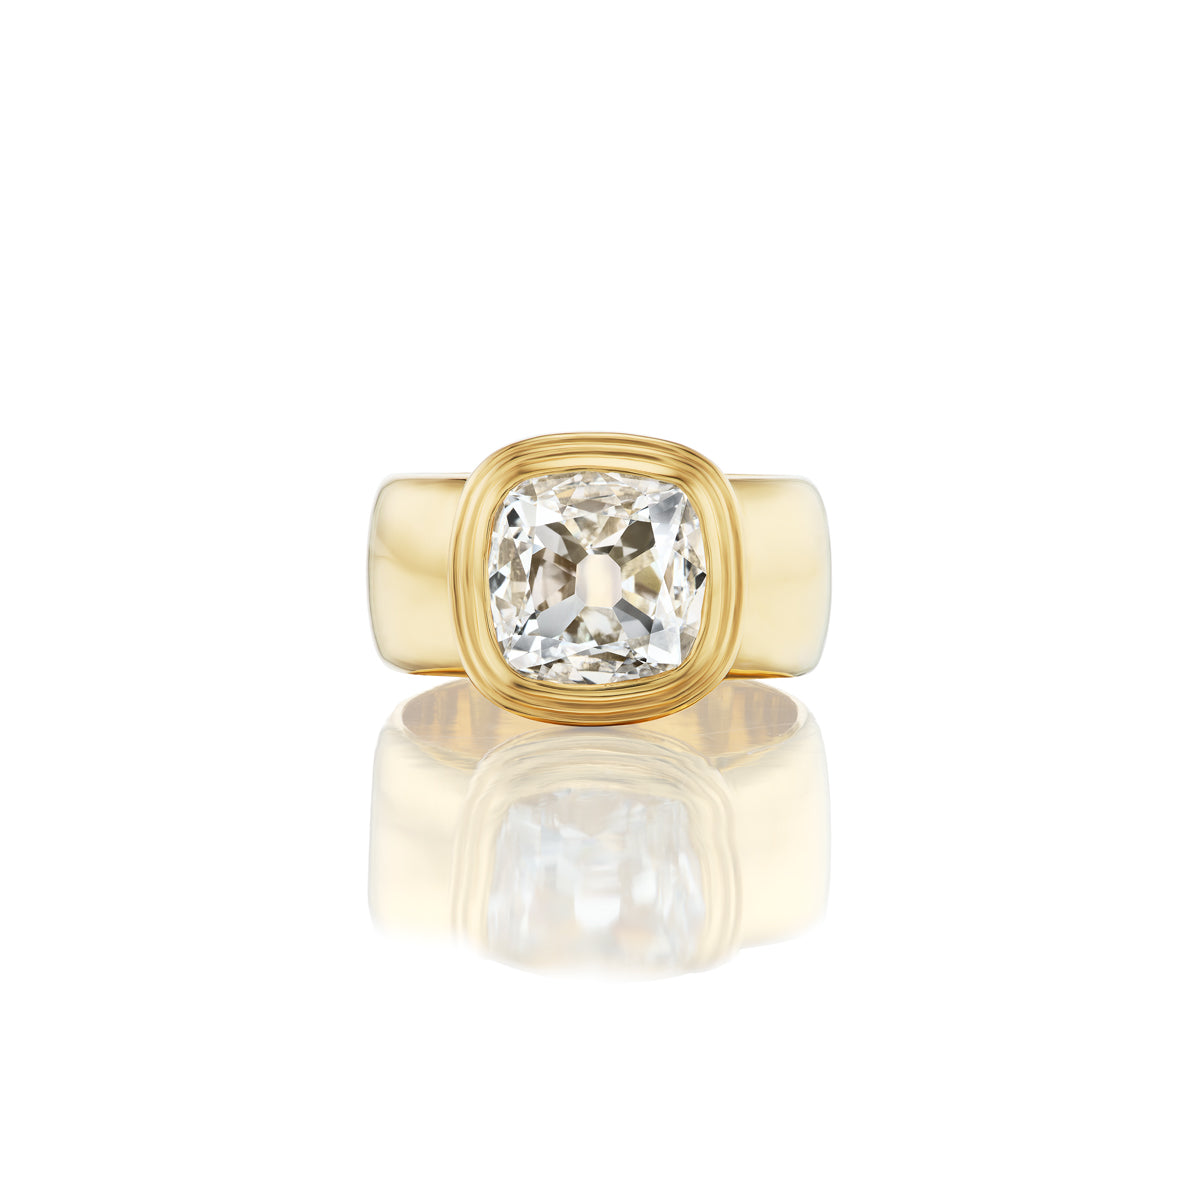 THE ENGAGEMENT RING // 4.02ct OMC